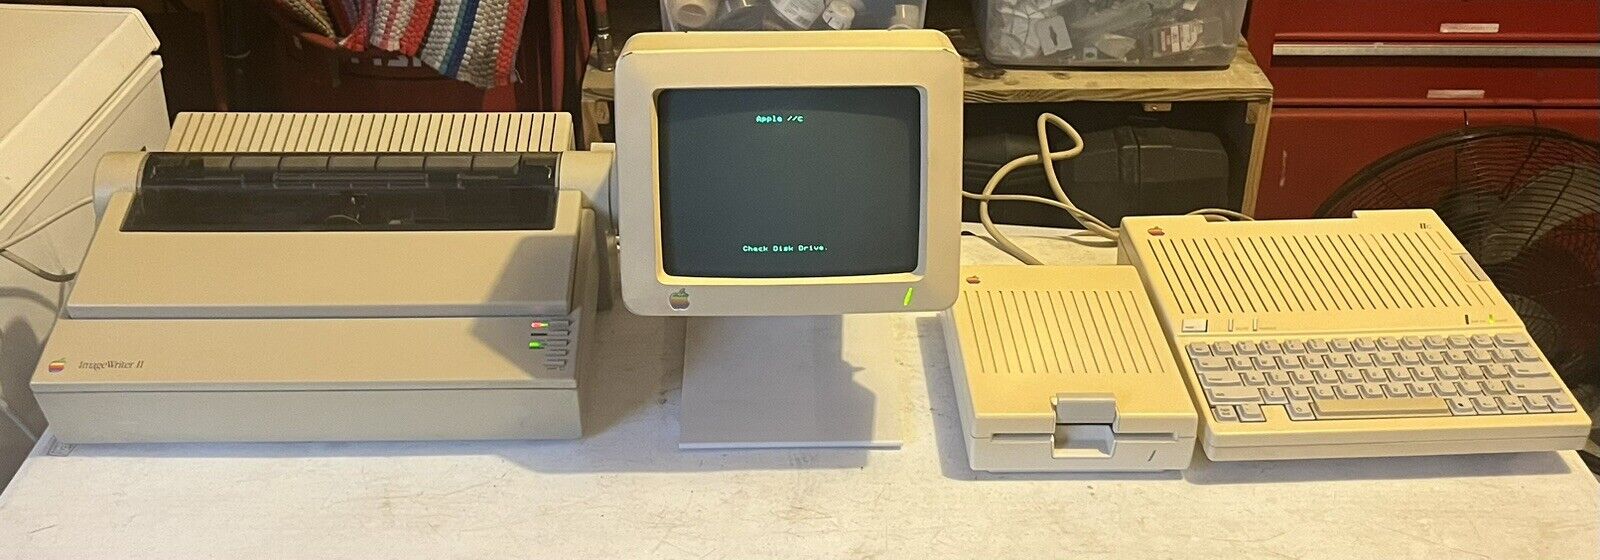 VTG Apple IIc A2S4000 Computer with Monitor, Disk Drive, ImageWriter COLLECTIBLE